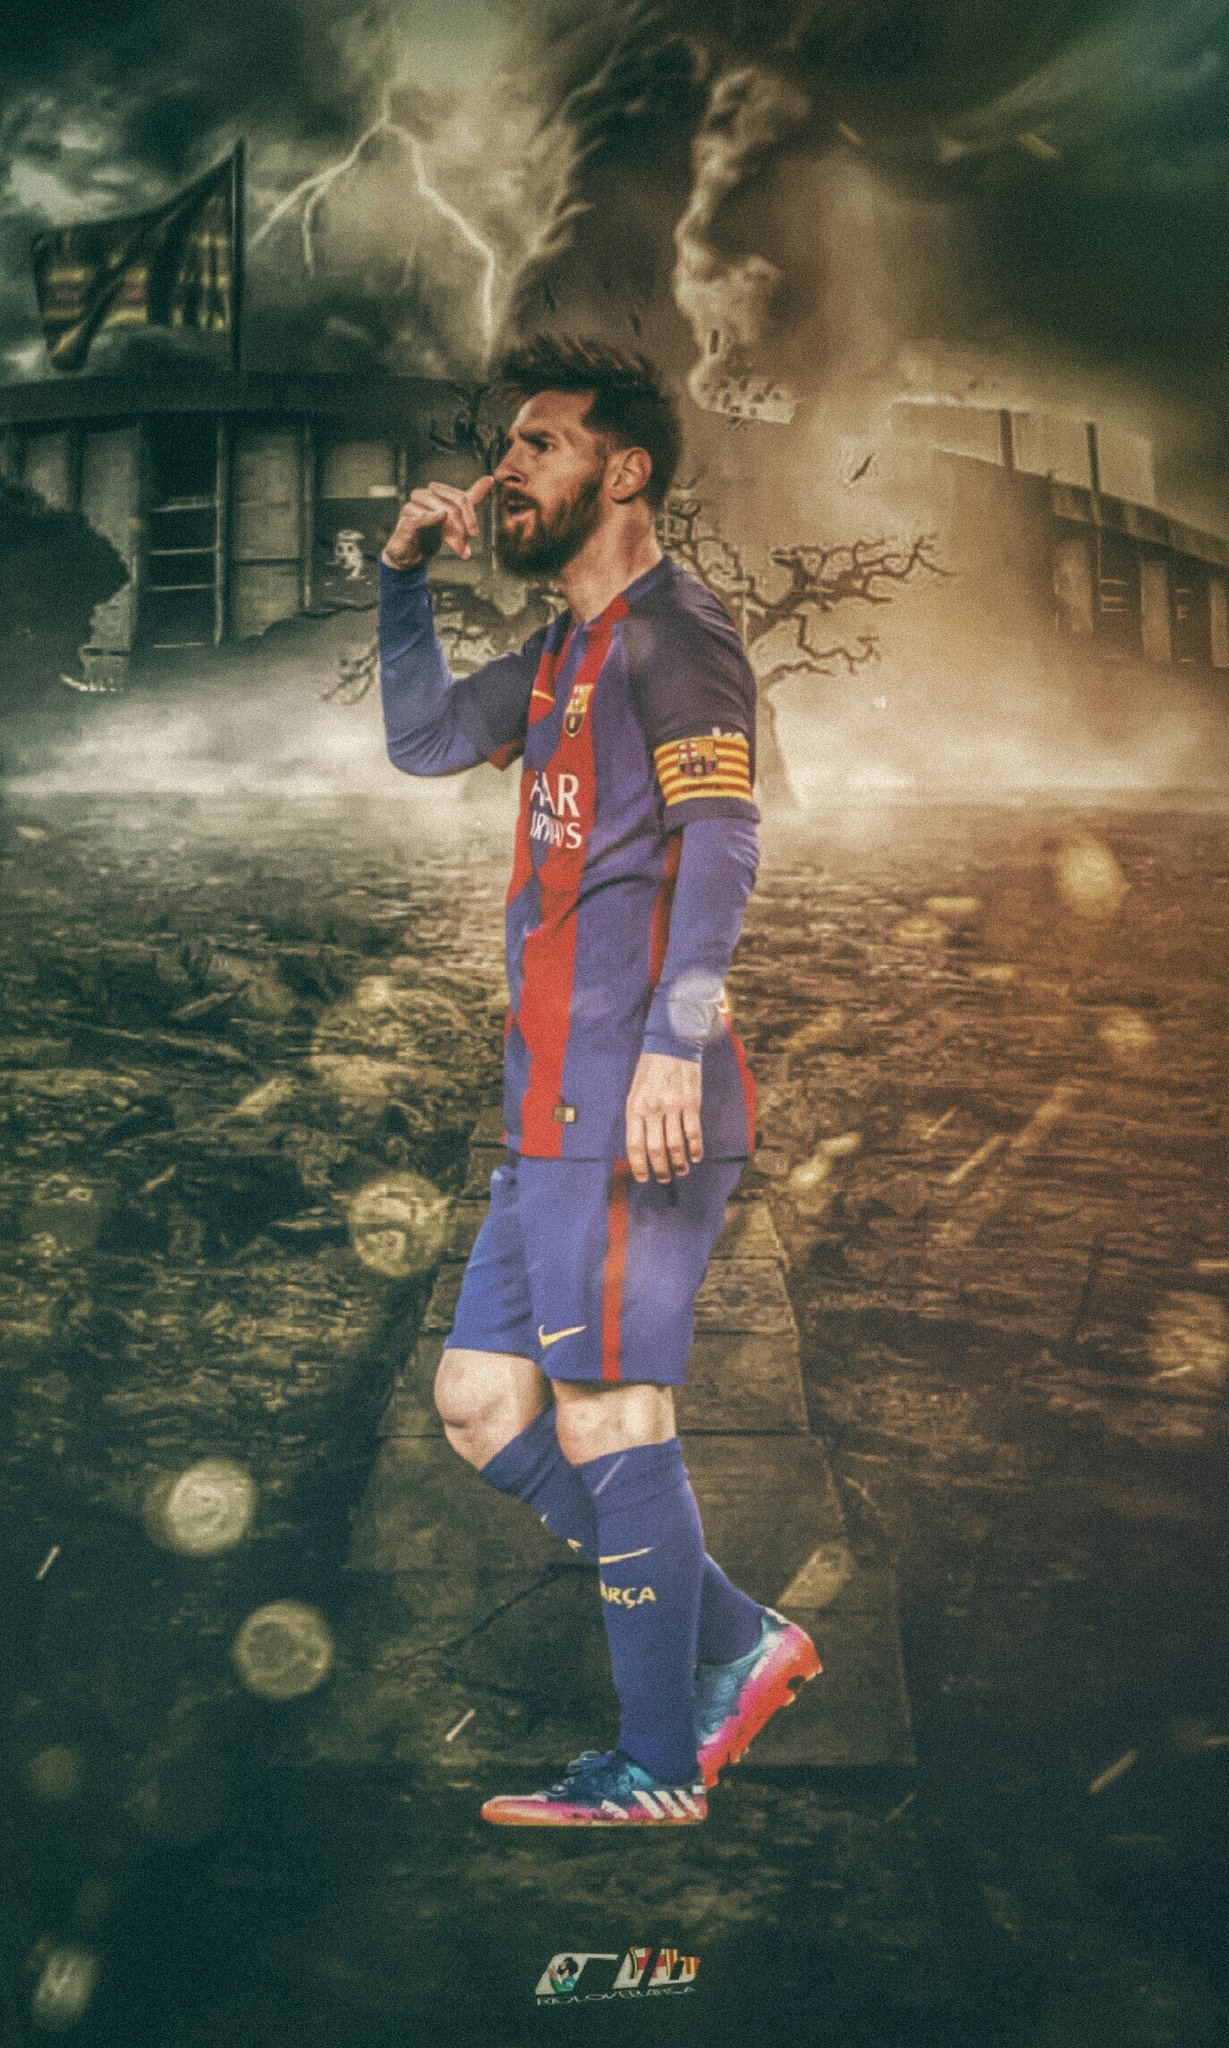 IG: @mediacules_ on Twitter: "Wallpaper: Lionel Messi. [by @riolovebarca] https://t.co/AGGAssKWSC"